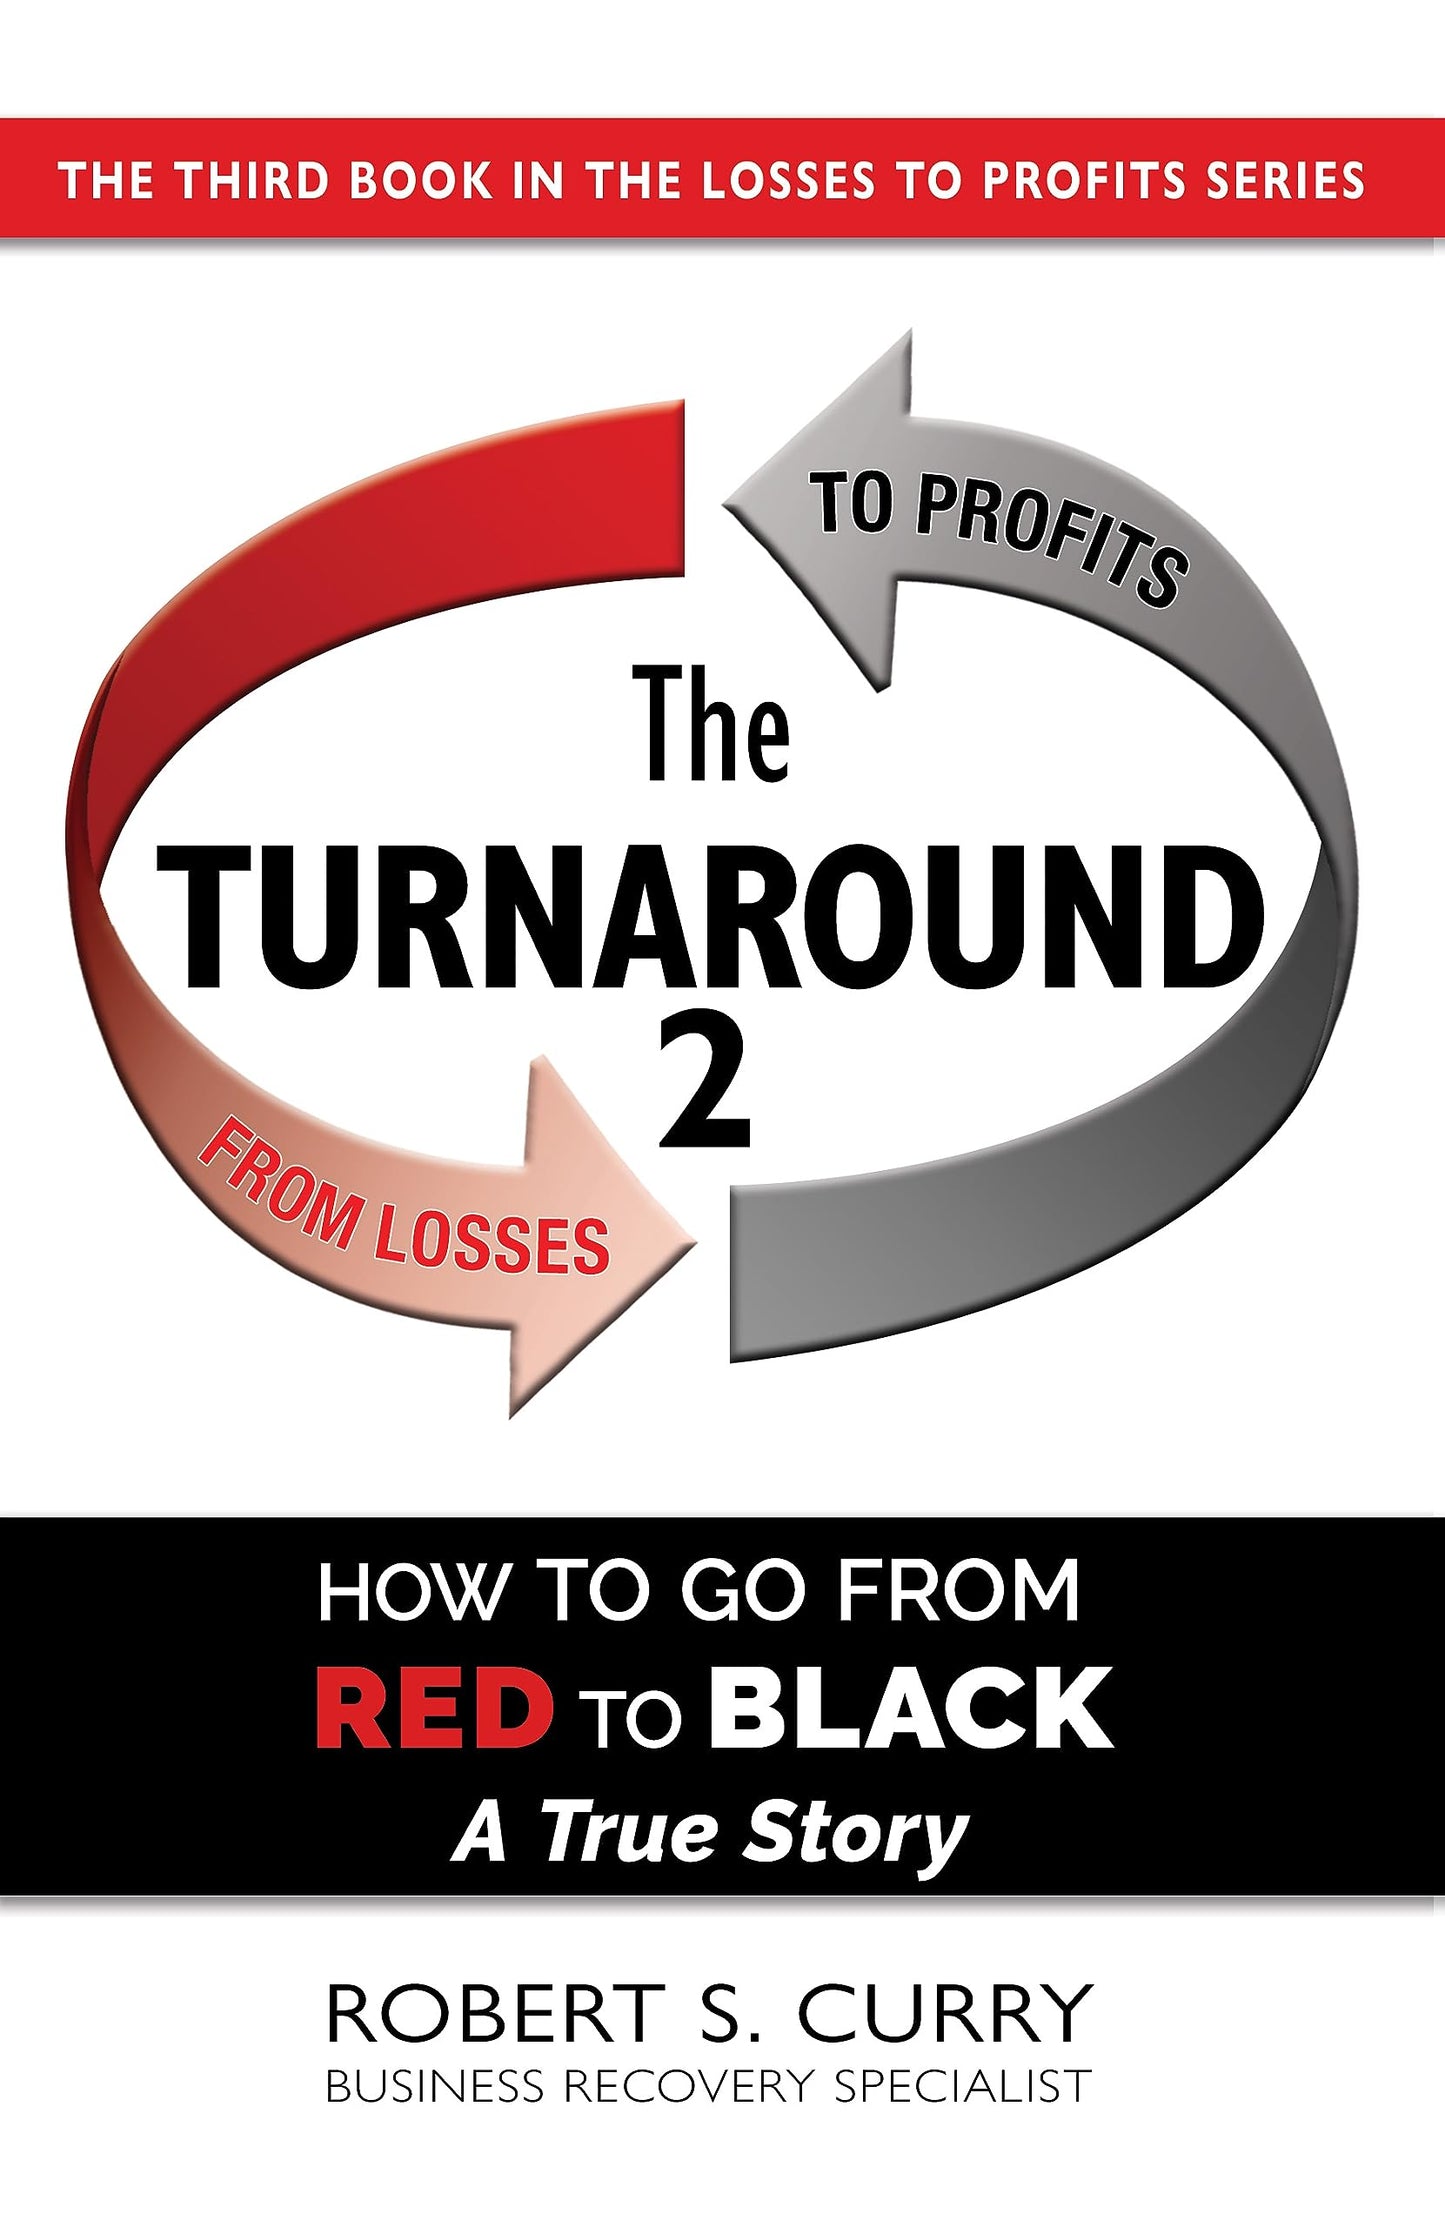 The Turnaround 2: How to Go from Red to Black: A True Story (From $700,000 in Excess Inventory to Streamlined Profits) (Losses to Profits Series)